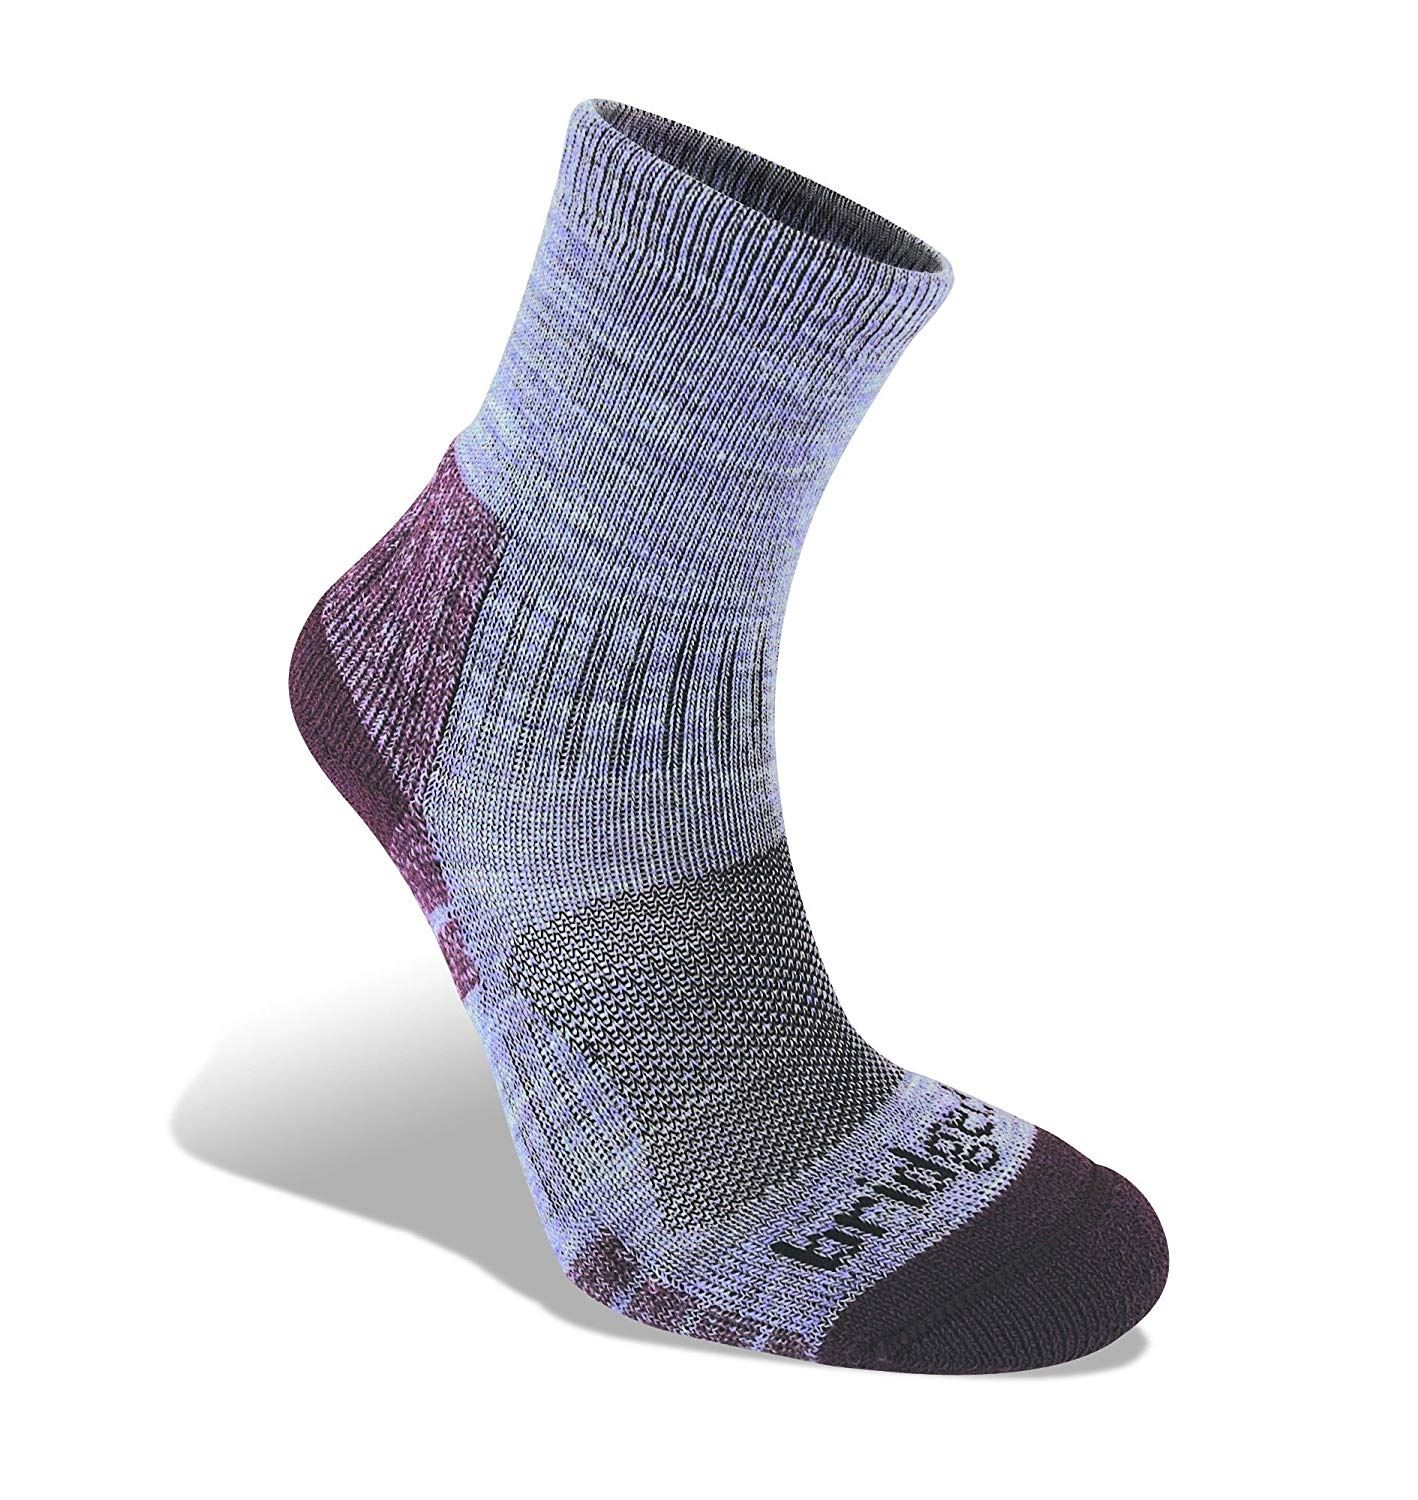 Picture for category Women's Hiking Socks 